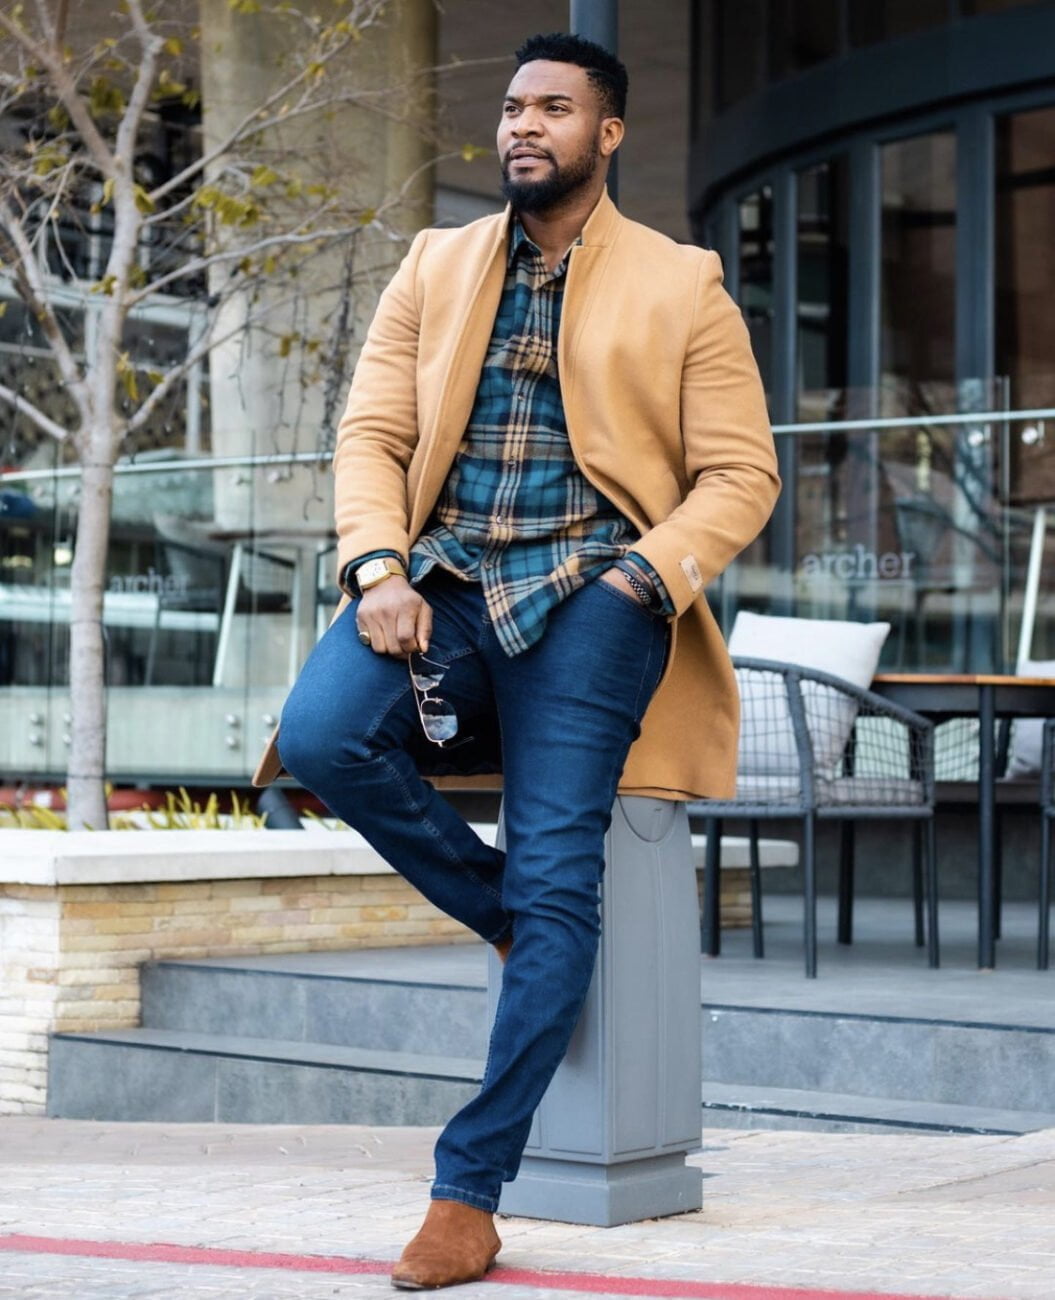 Elegance personified as Kunle Remi rocks bvrown coat, flannel shirt, denim trousers and suede shoes.